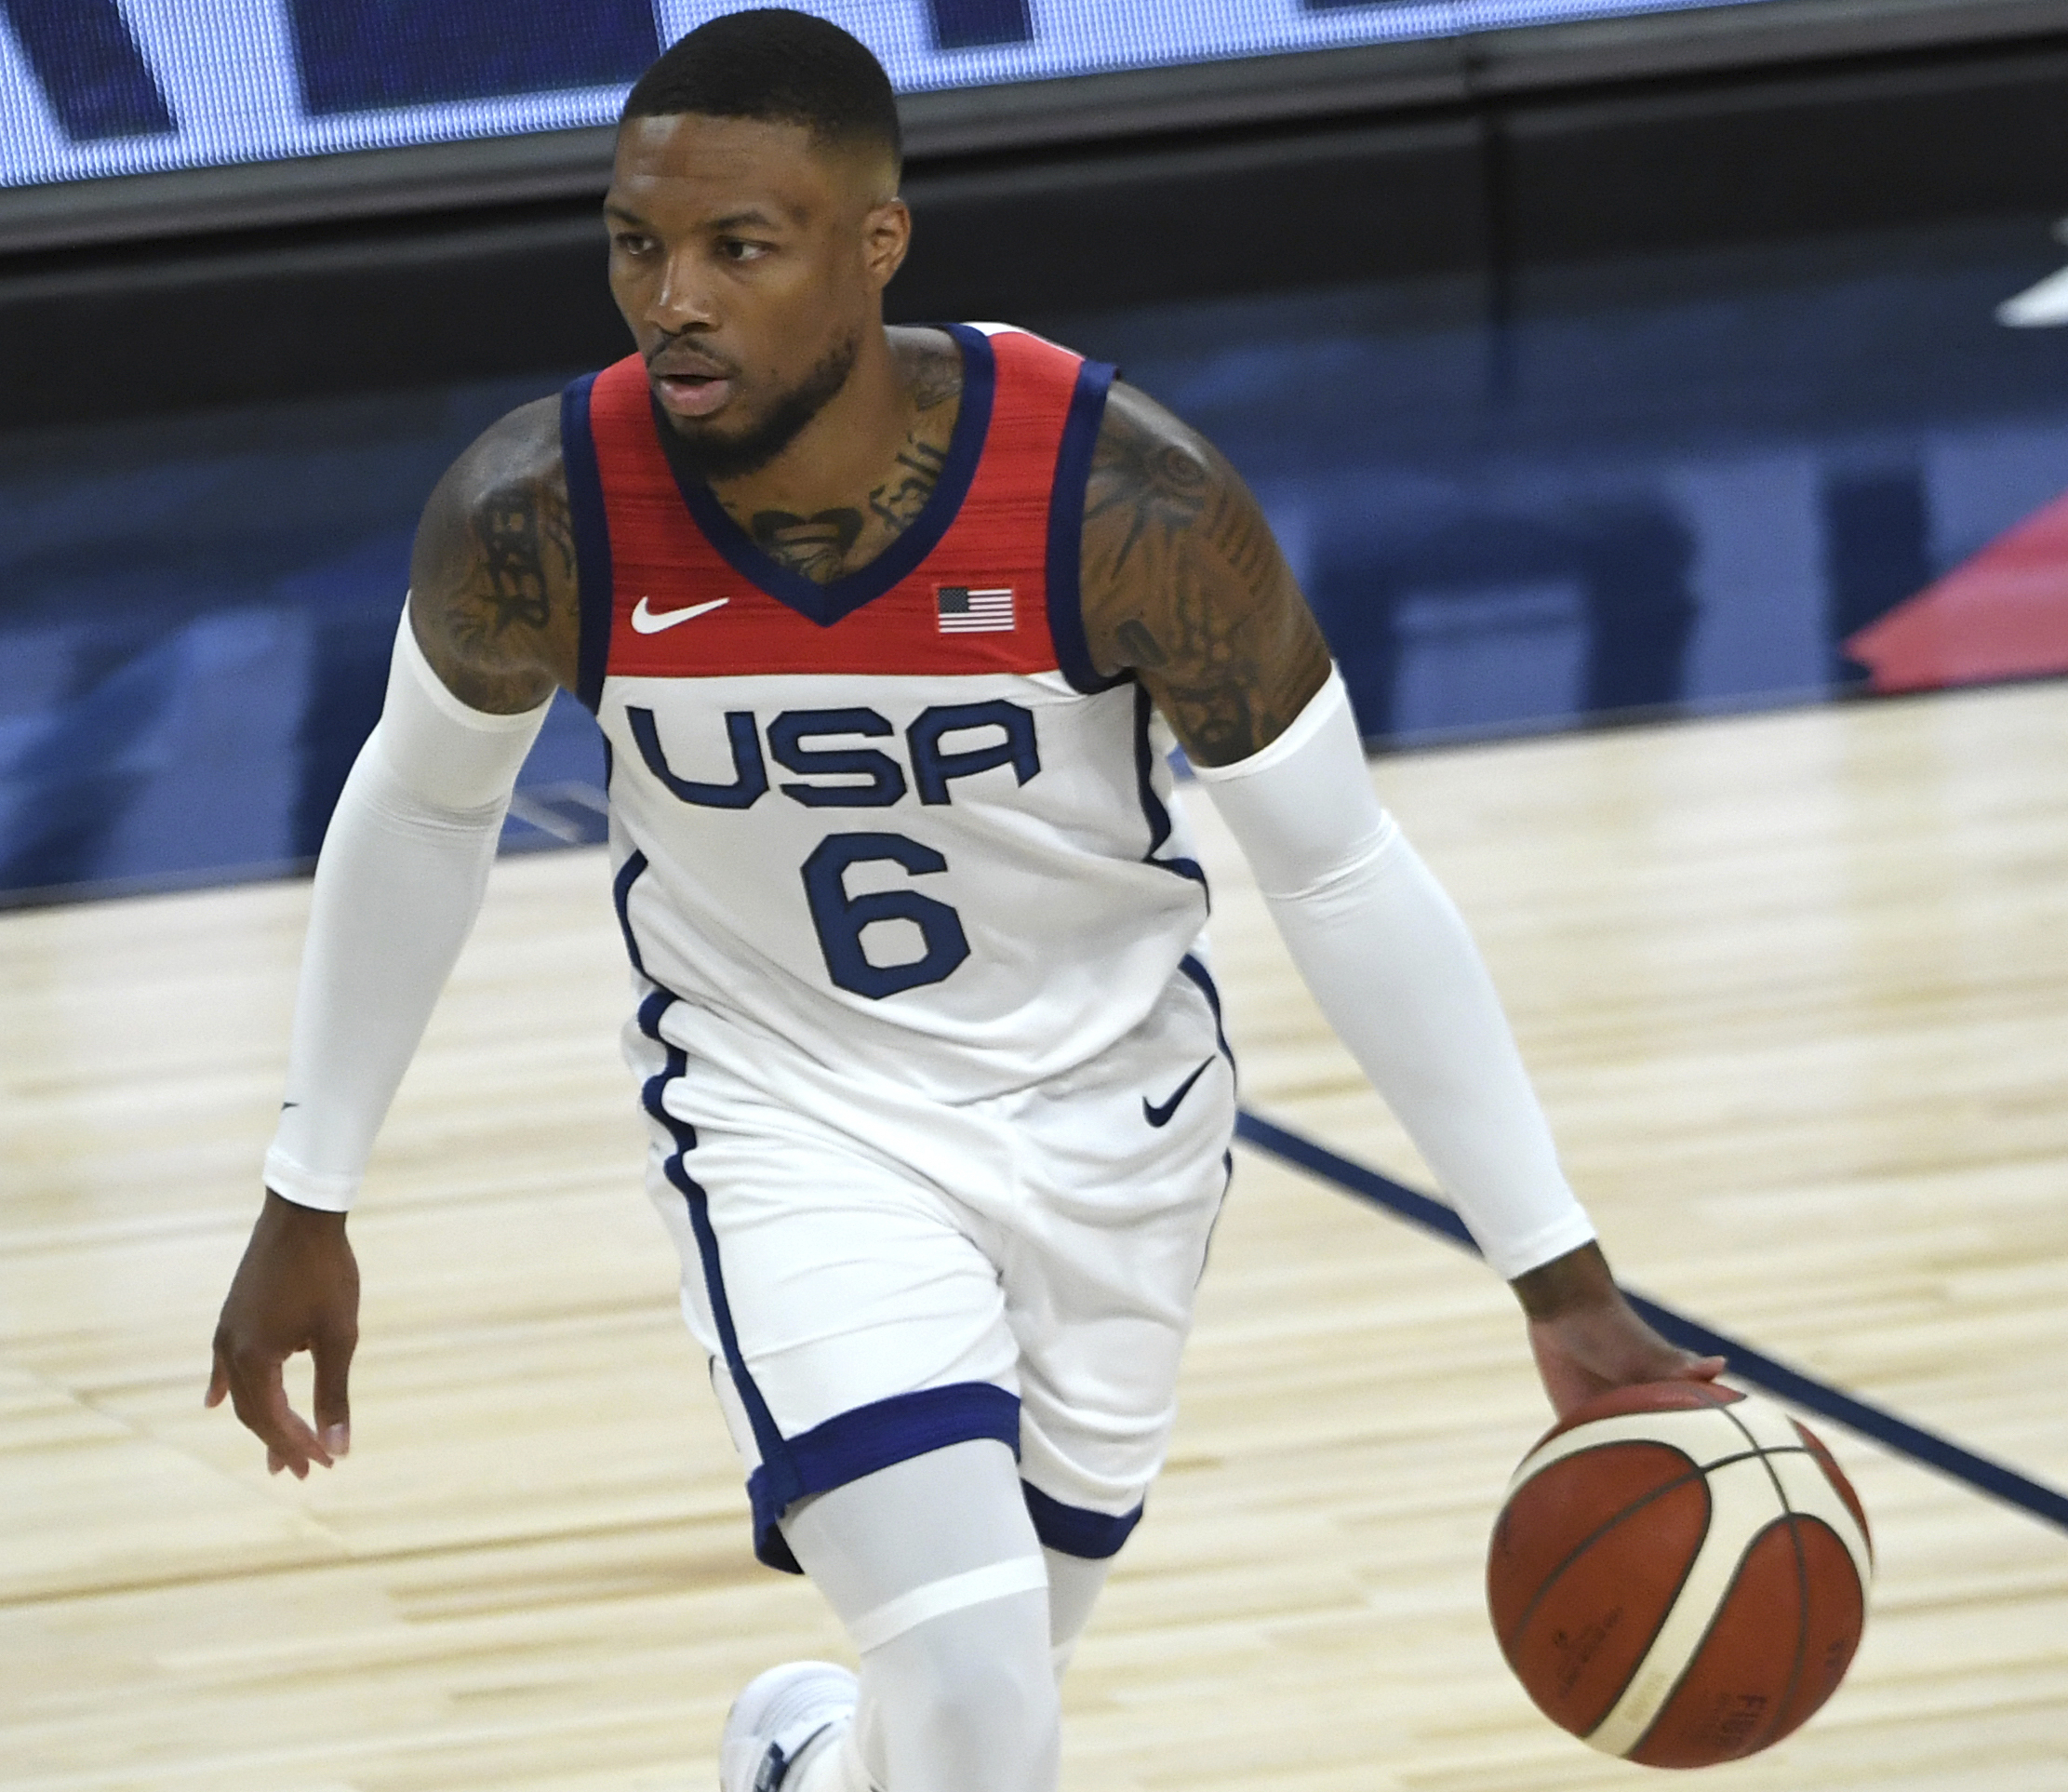 Damian Lillard Team USA Basketball jerseys one of the top-selling Olympics  items: Here's where you can buy one online 